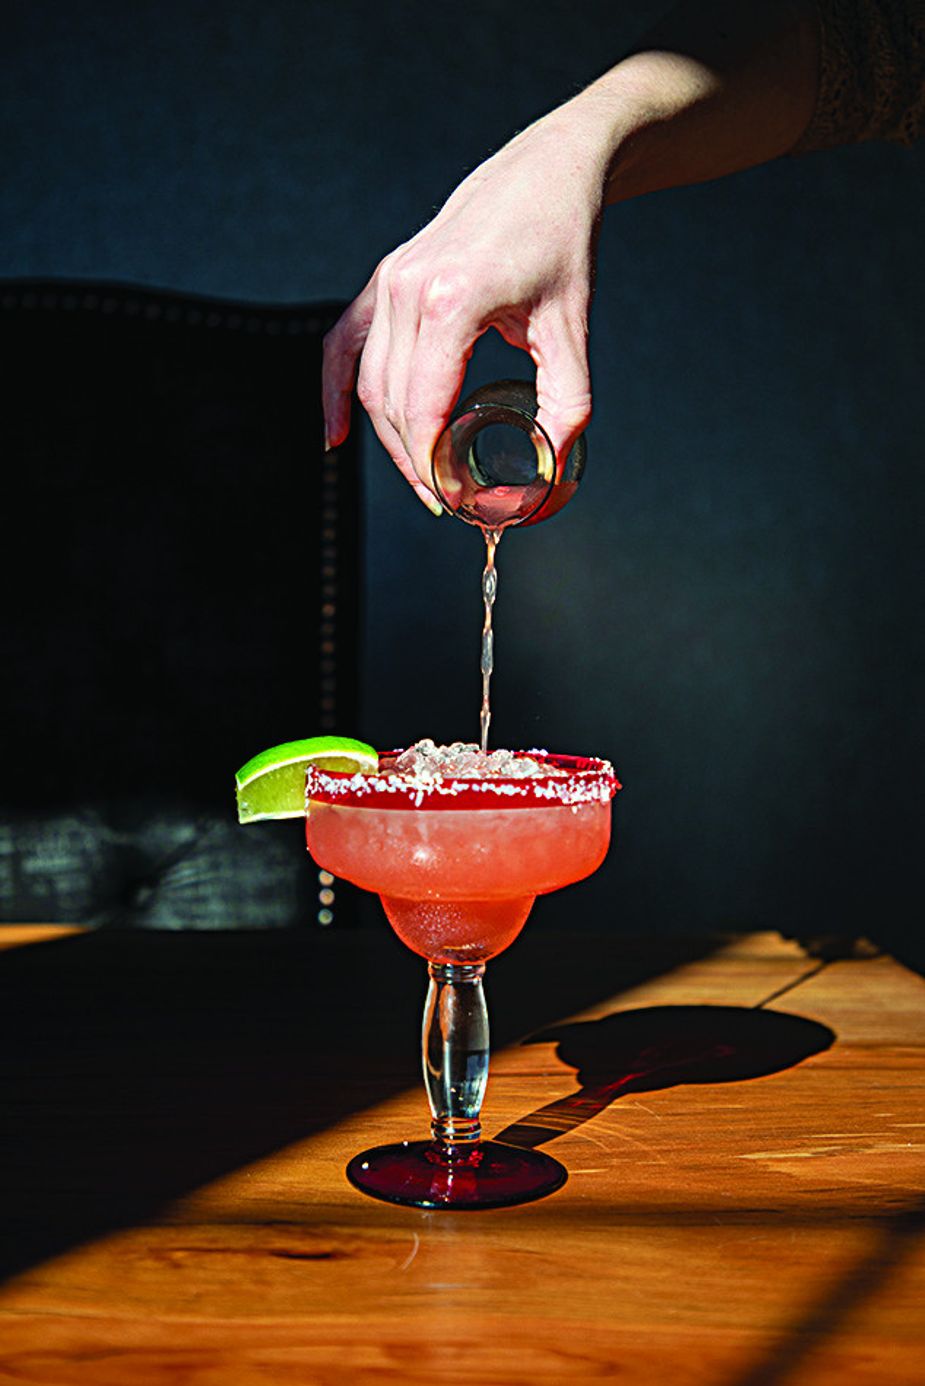 Guests can choose from several varieties of margaritas on the drink menu—plus a selection of alcohol-free mocktails. Photo by Lori Duckworth